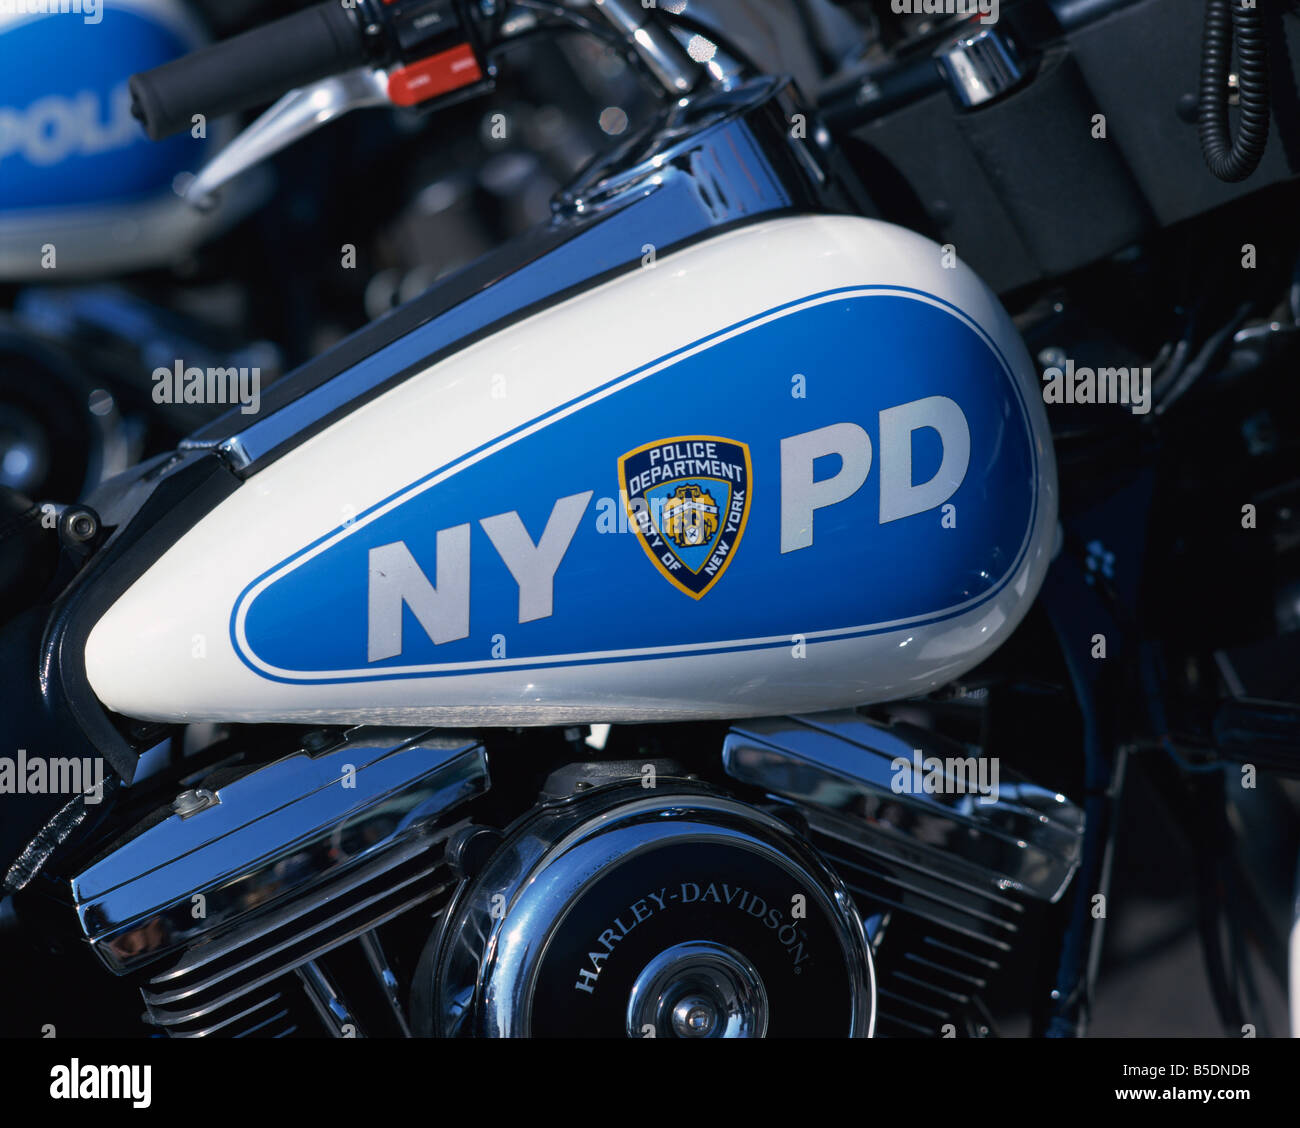 Close-up of Harley Davidson motorcycle with insignia of the City of New York Police Department, NYPD, on side, in New York, USA Stock Photo